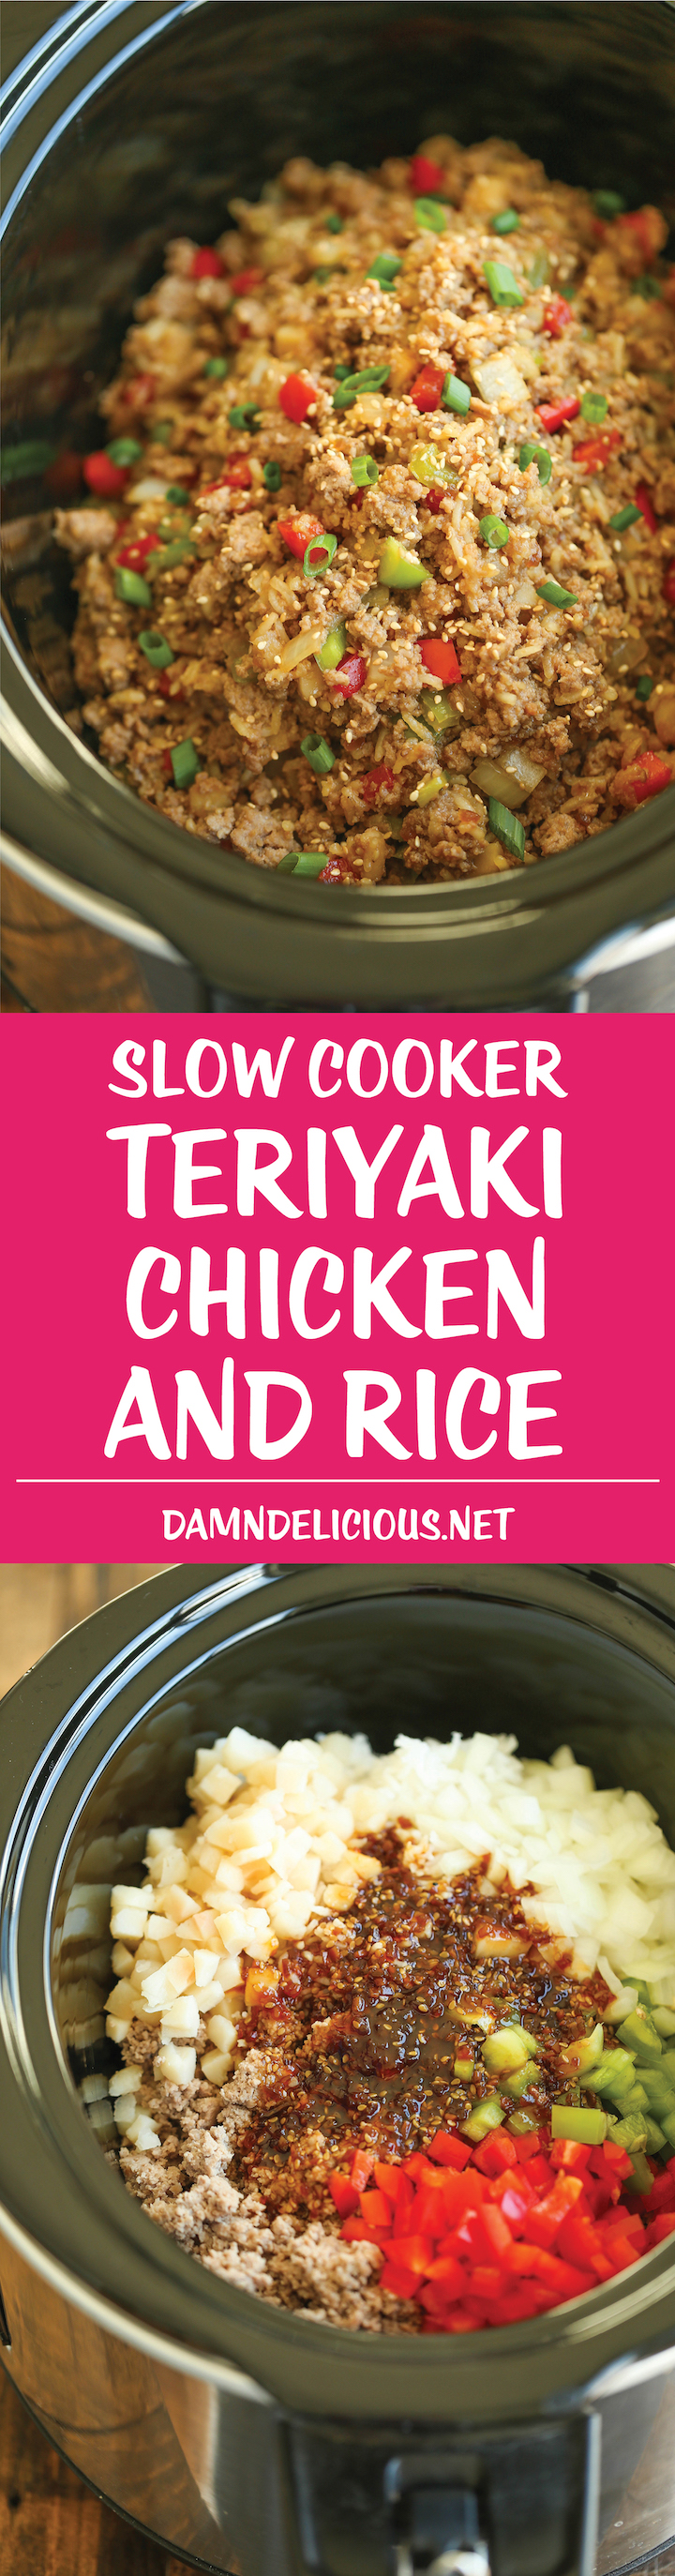 Slow Cooker Teriyaki Chicken and Rice - Saucy chicken, rice and veggies come together so easily right in the crockpot. Sure to be a weeknight staple!